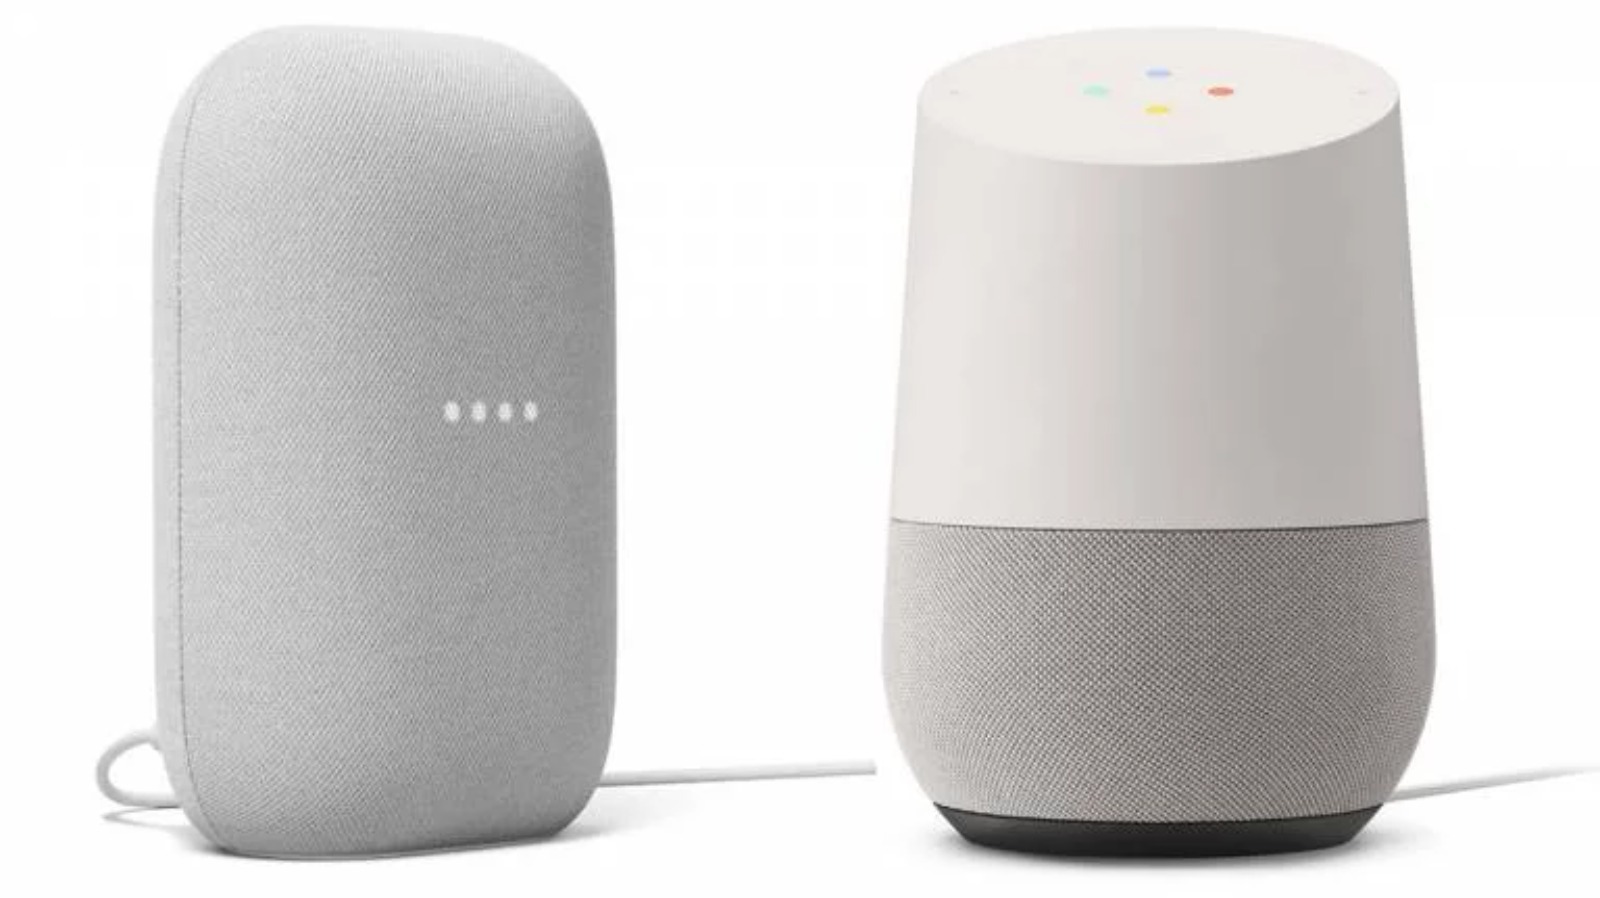 Nest Audio Vs Google Home: It's An Enticing Upgrade